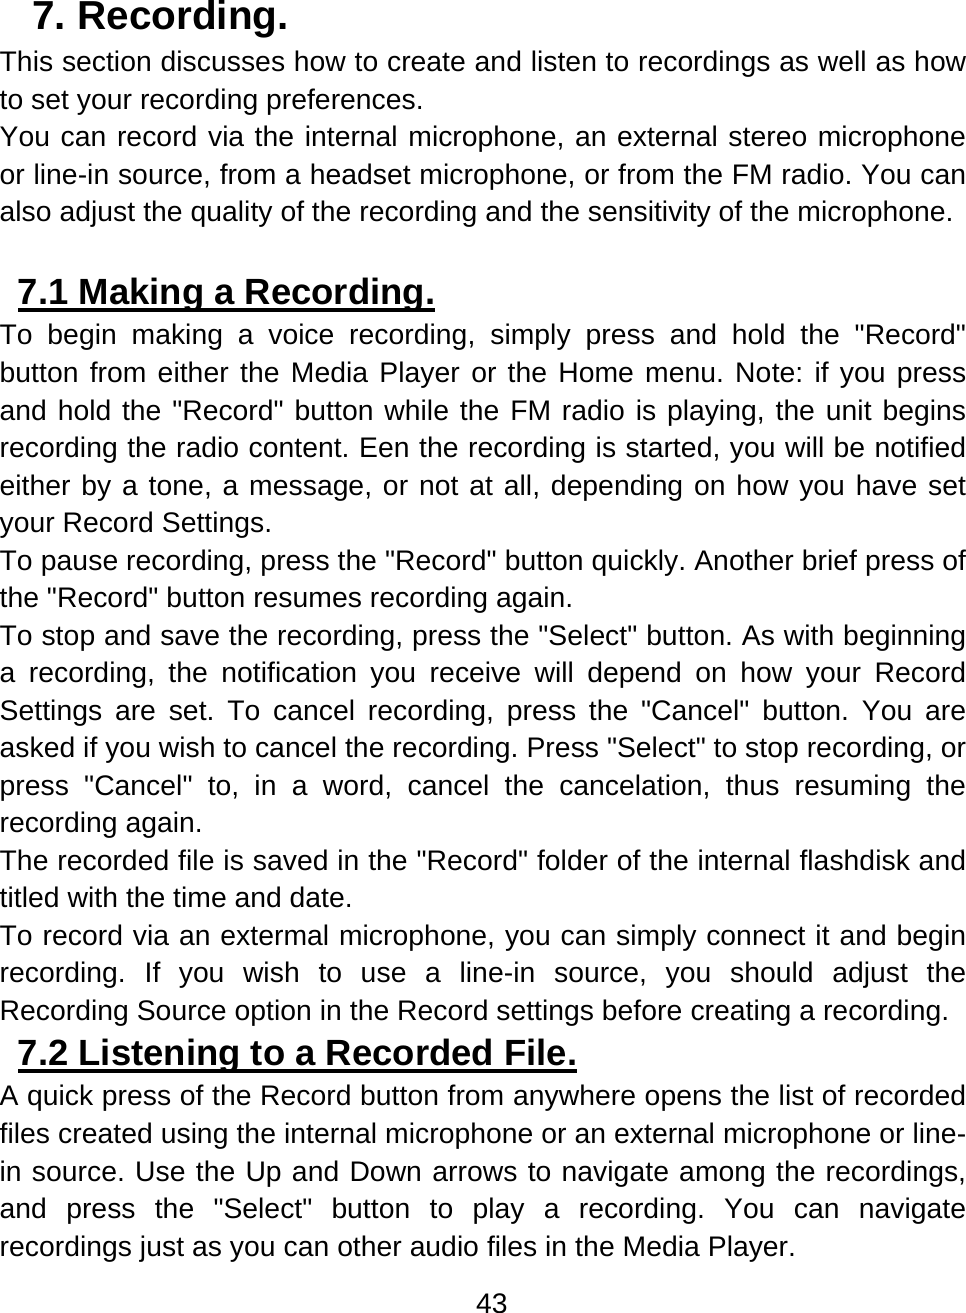 43  7. Recording.  This section discusses how to create and listen to recordings as well as how to set your recording preferences. You can record via the internal microphone, an external stereo microphone or line-in source, from a headset microphone, or from the FM radio. You can also adjust the quality of the recording and the sensitivity of the microphone.  7.1 Making a Recording.  To begin making a voice recording, simply press and hold the &quot;Record&quot; button from either the Media Player or the Home menu. Note: if you press and hold the &quot;Record&quot; button while the FM radio is playing, the unit begins recording the radio content. Een the recording is started, you will be notified either by a tone, a message, or not at all, depending on how you have set your Record Settings. To pause recording, press the &quot;Record&quot; button quickly. Another brief press of the &quot;Record&quot; button resumes recording again. To stop and save the recording, press the &quot;Select&quot; button. As with beginning a recording, the notification you receive will depend on how your Record Settings are set. To cancel recording, press the &quot;Cancel&quot; button. You are asked if you wish to cancel the recording. Press &quot;Select&quot; to stop recording, or press &quot;Cancel&quot; to, in a word, cancel the cancelation, thus resuming the recording again. The recorded file is saved in the &quot;Record&quot; folder of the internal flashdisk and titled with the time and date.  To record via an extermal microphone, you can simply connect it and begin recording. If you wish to use a line-in source, you should adjust the Recording Source option in the Record settings before creating a recording.  7.2 Listening to a Recorded File.  A quick press of the Record button from anywhere opens the list of recorded files created using the internal microphone or an external microphone or line-in source. Use the Up and Down arrows to navigate among the recordings, and press the &quot;Select&quot; button to play a recording. You can navigate recordings just as you can other audio files in the Media Player. 